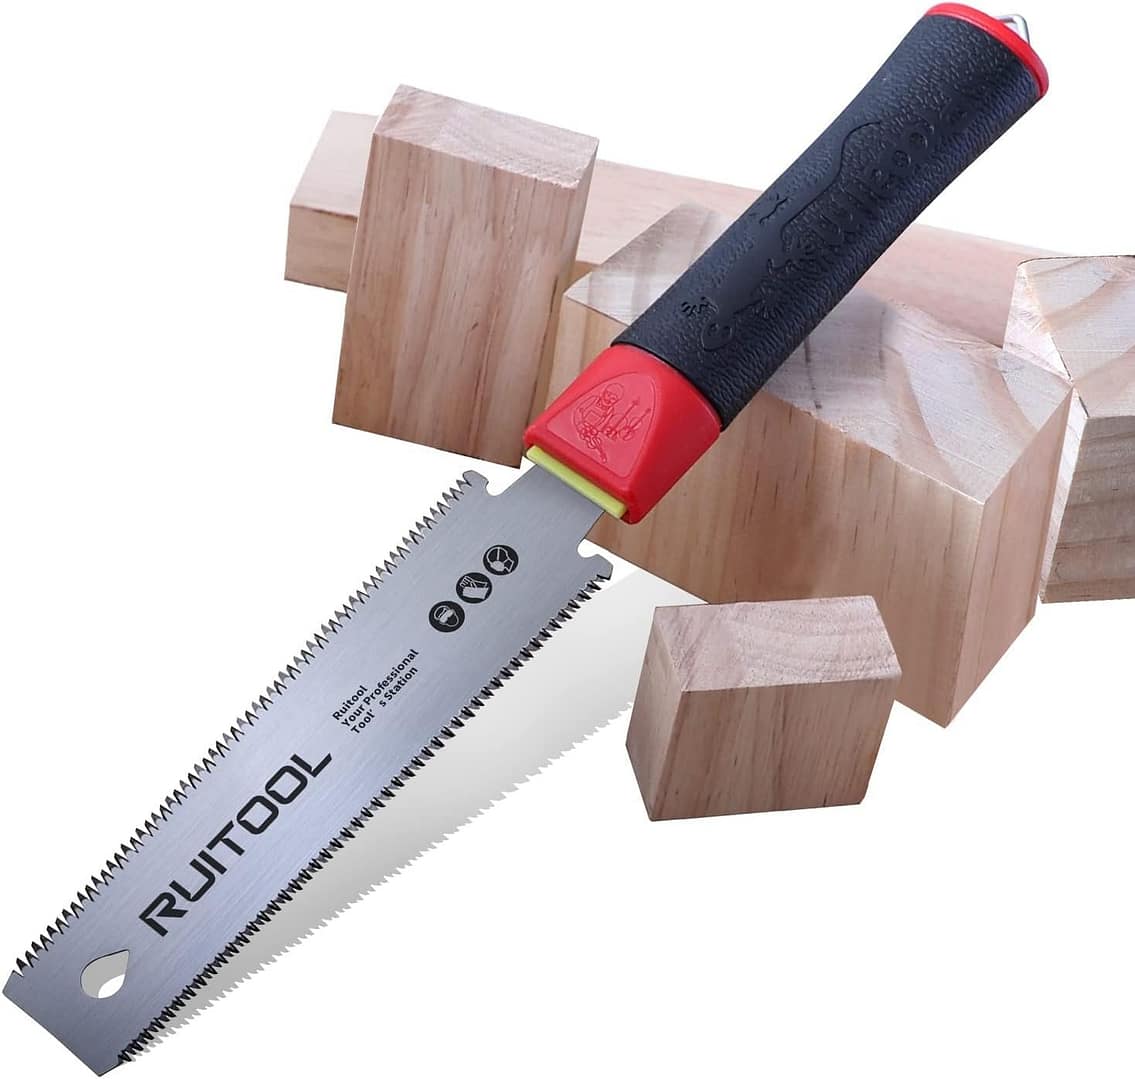 ruitool japanese hand saw 6 inch pull saw review